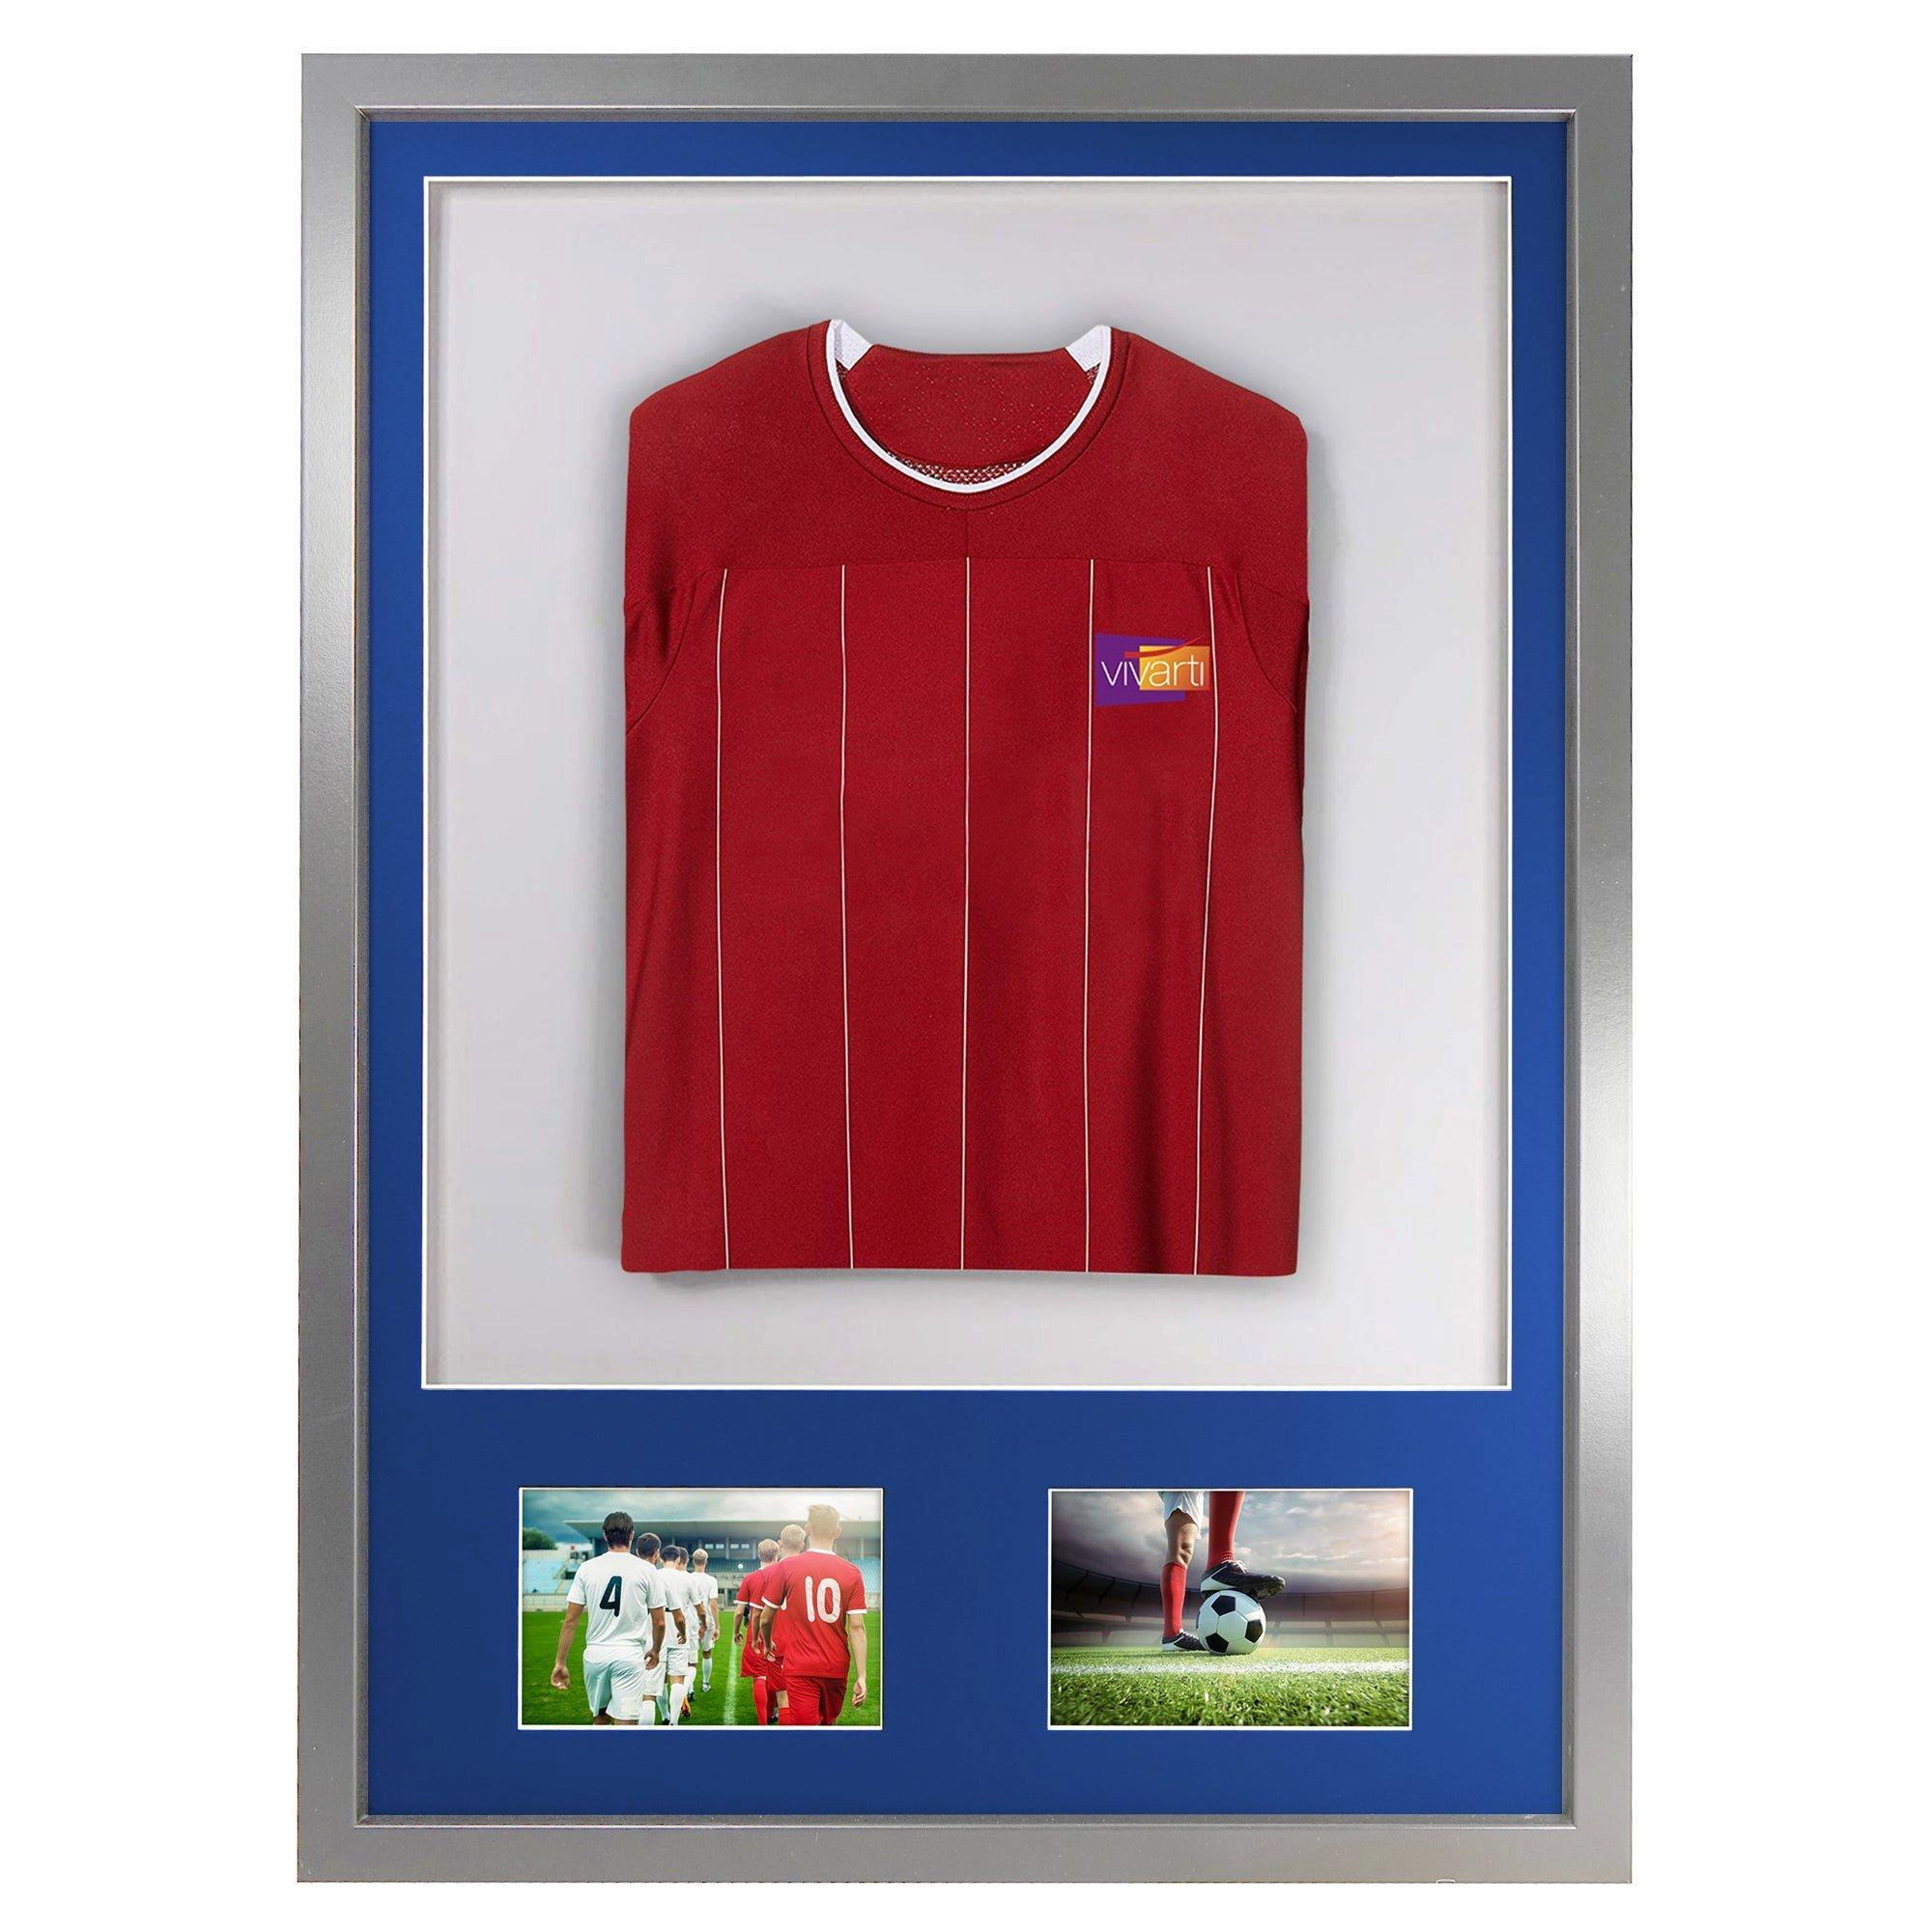 3D + Double Aperture Mounted Sports Shirt Display Frame with Silver Frame and Blue Mount 50 x 70cm - image 1